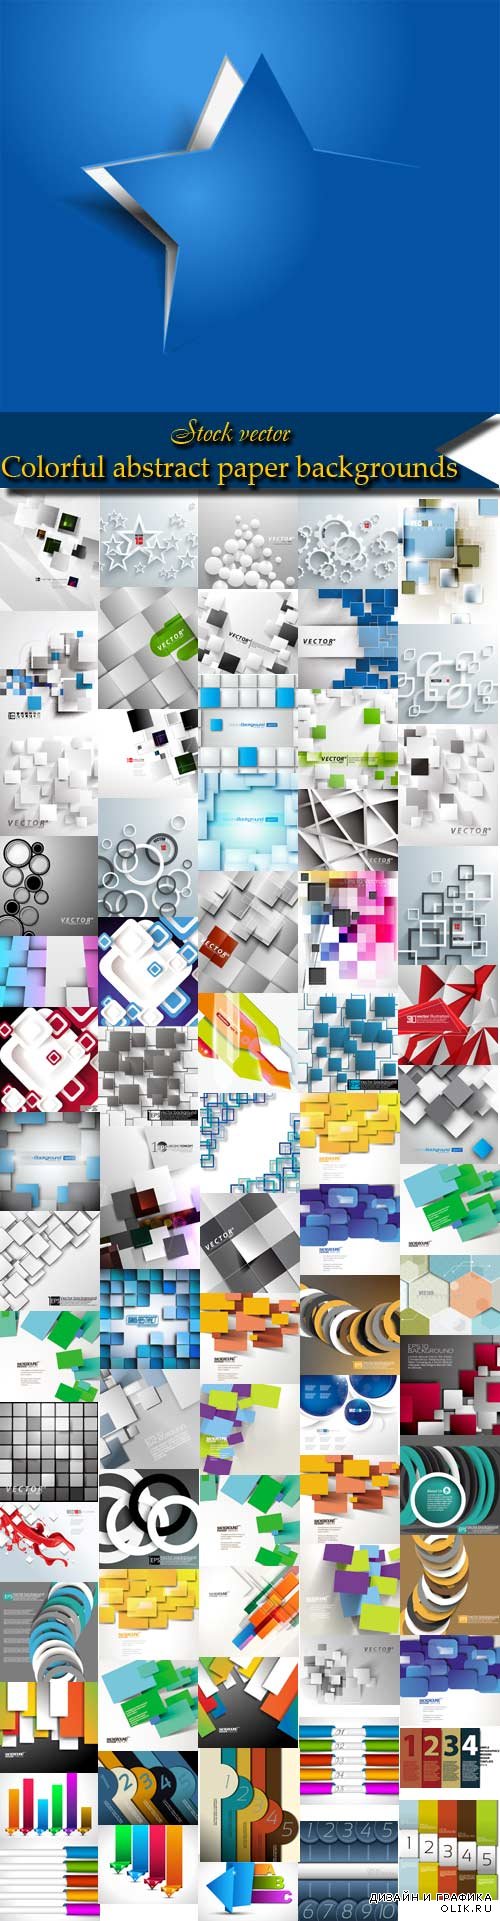 Colorful abstract paper backgrounds